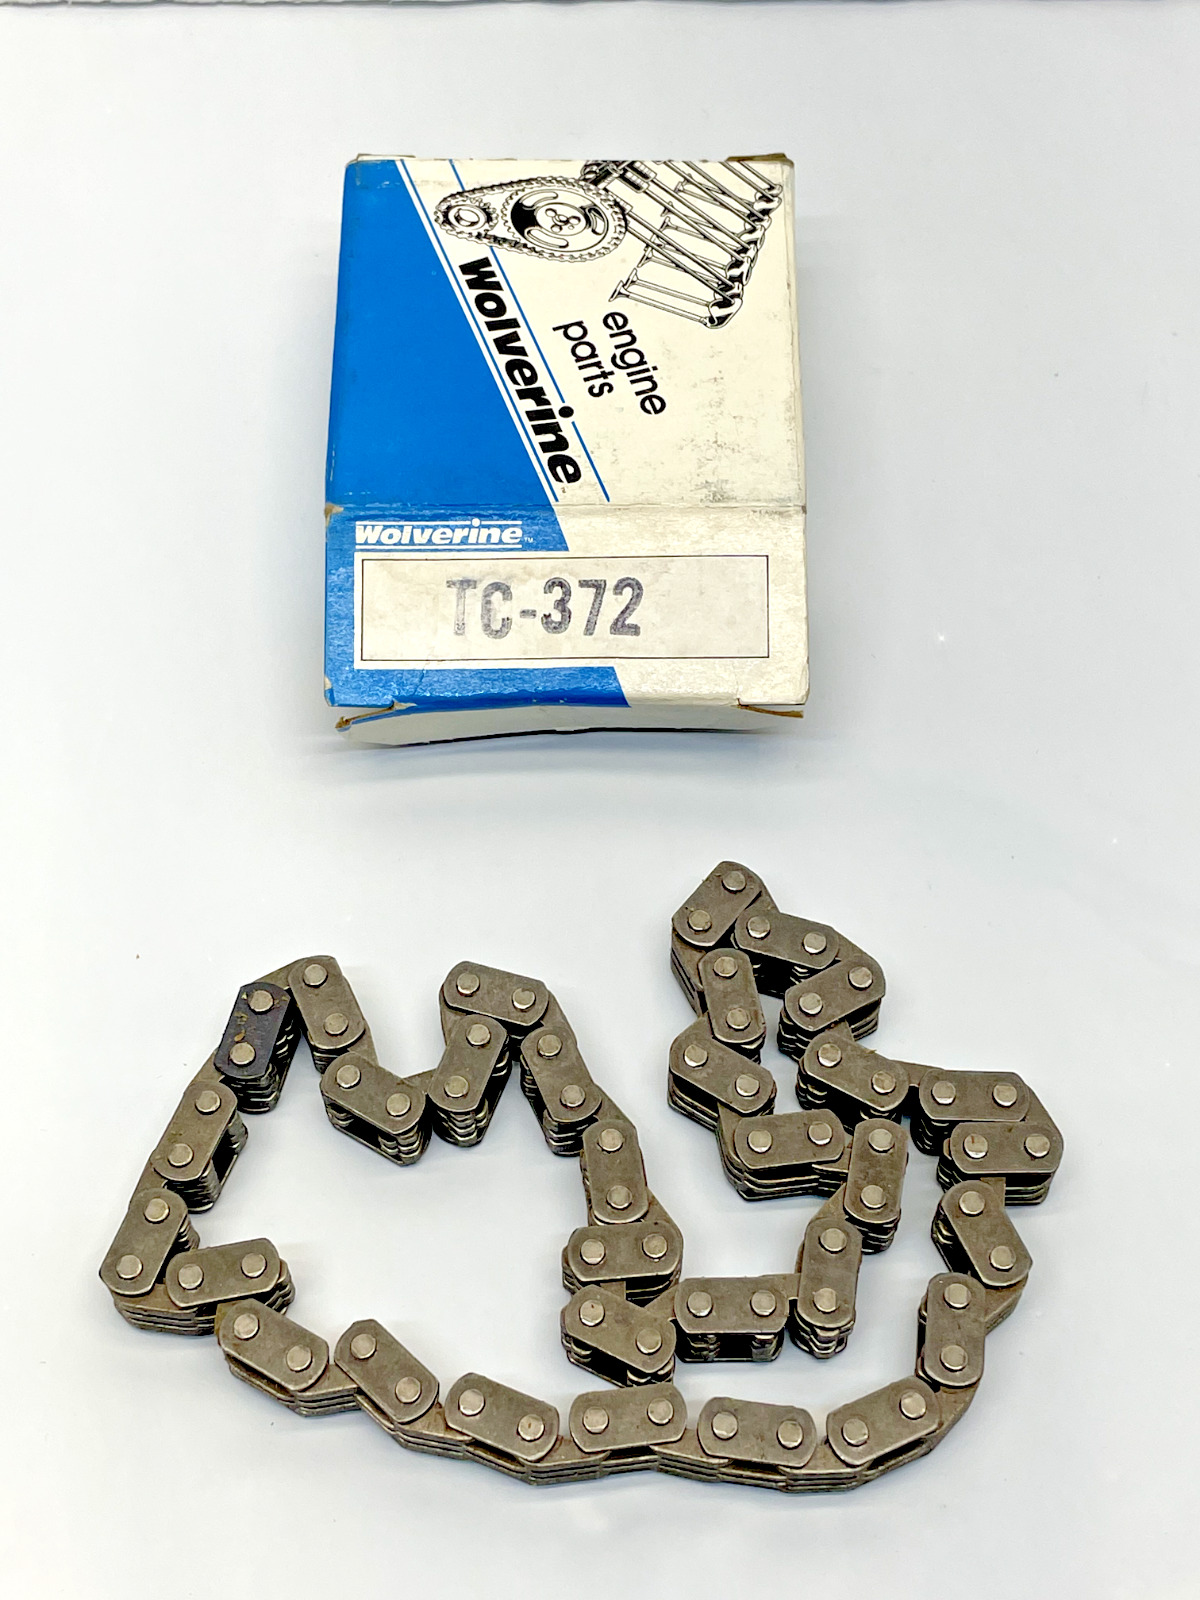 TC 372 Wolverine NOS Engine Timing Chain USA made xref. Cloyes # C372